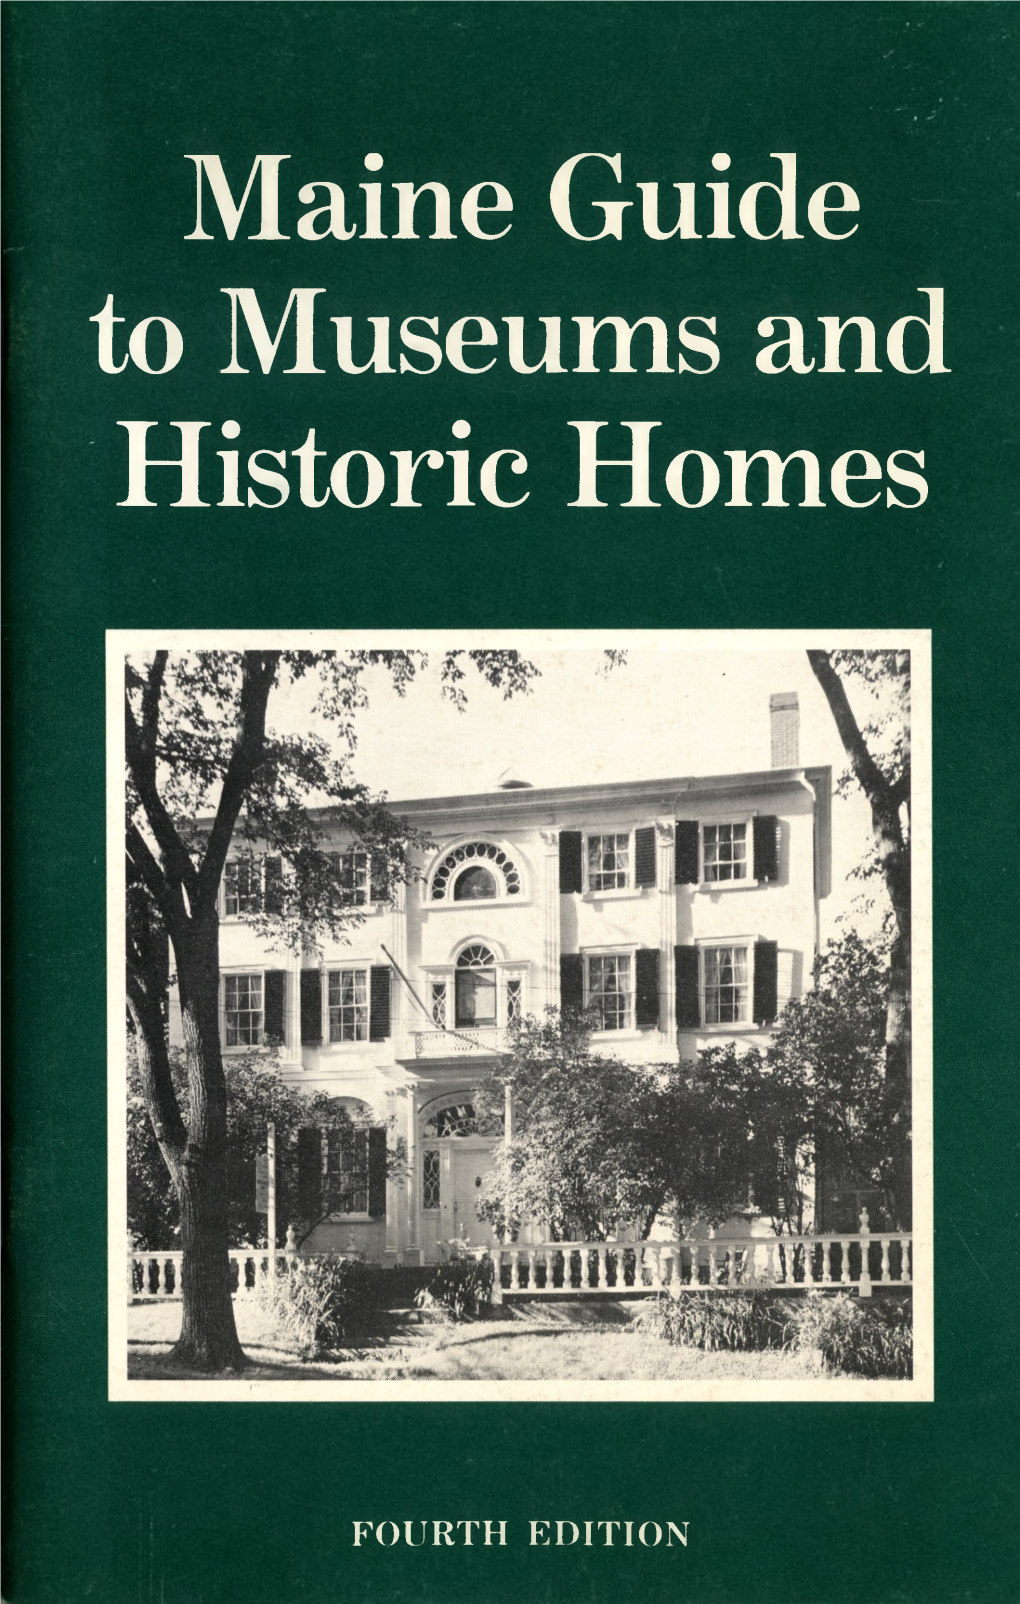 Maine Guide to Museums and Historic Homes (4Th Edition)